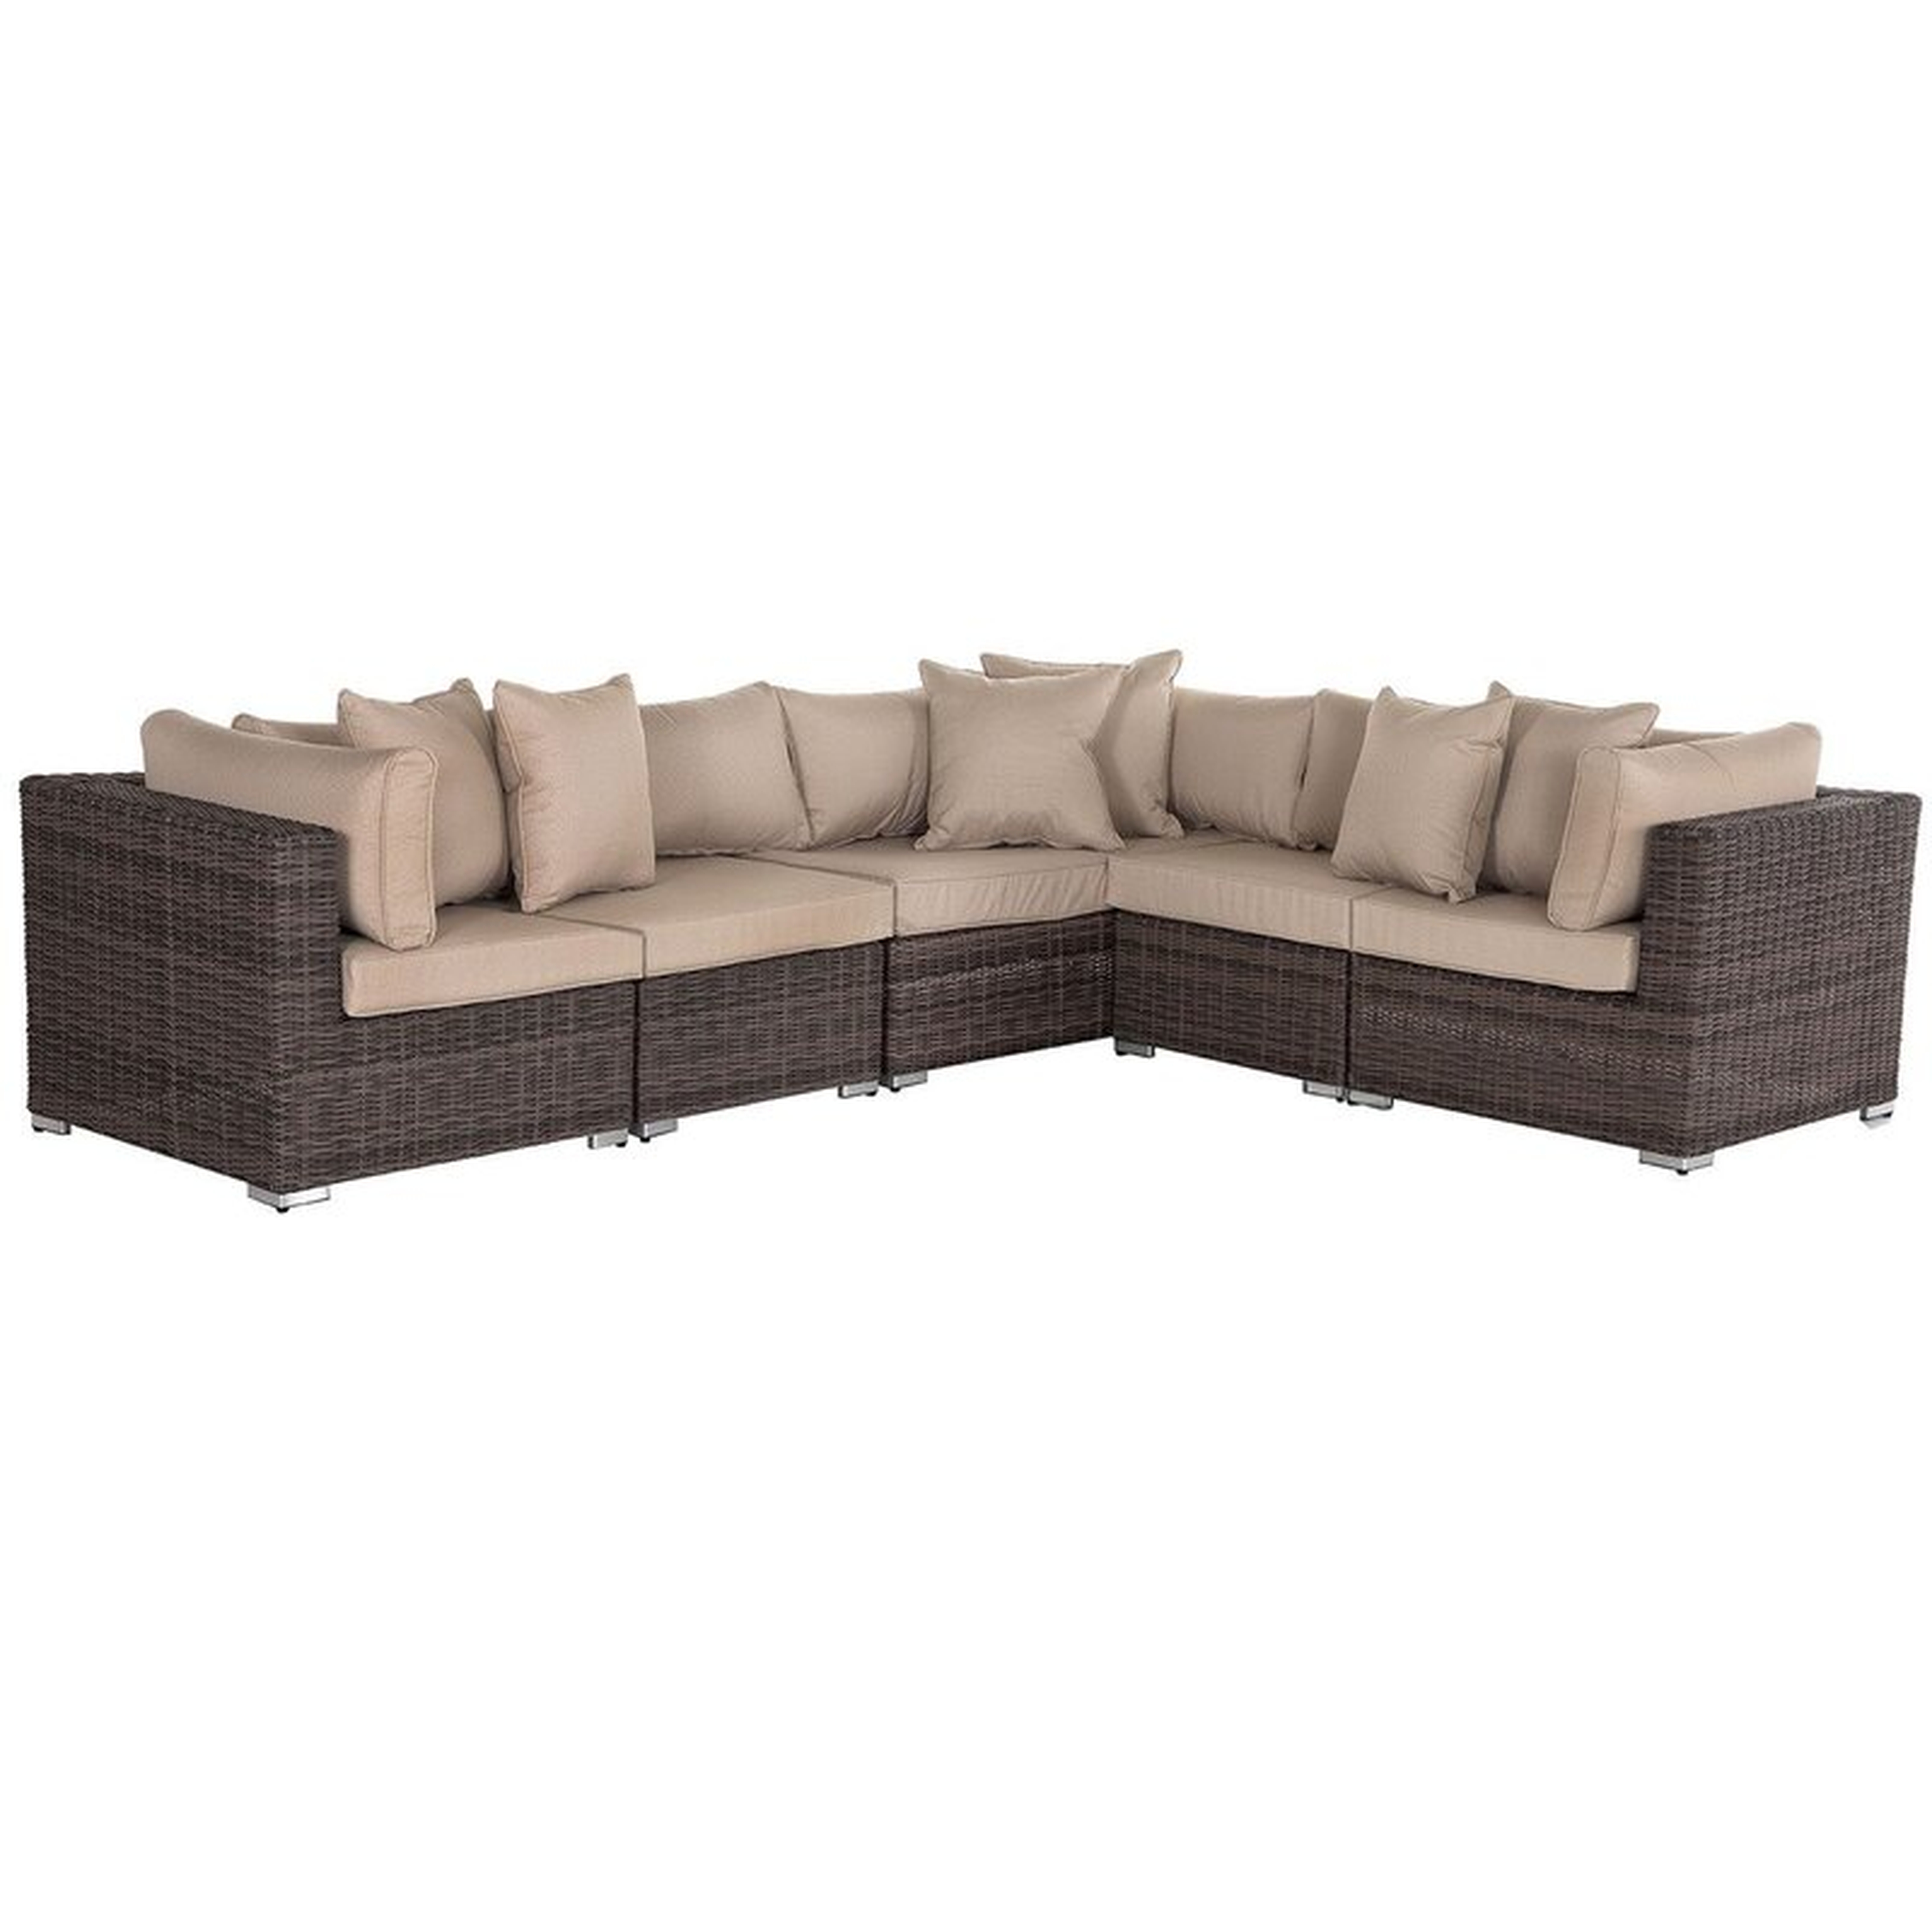 Demmie Outdoor Wicker Right Hand Facing Patio Sectional with Cushions - Wayfair